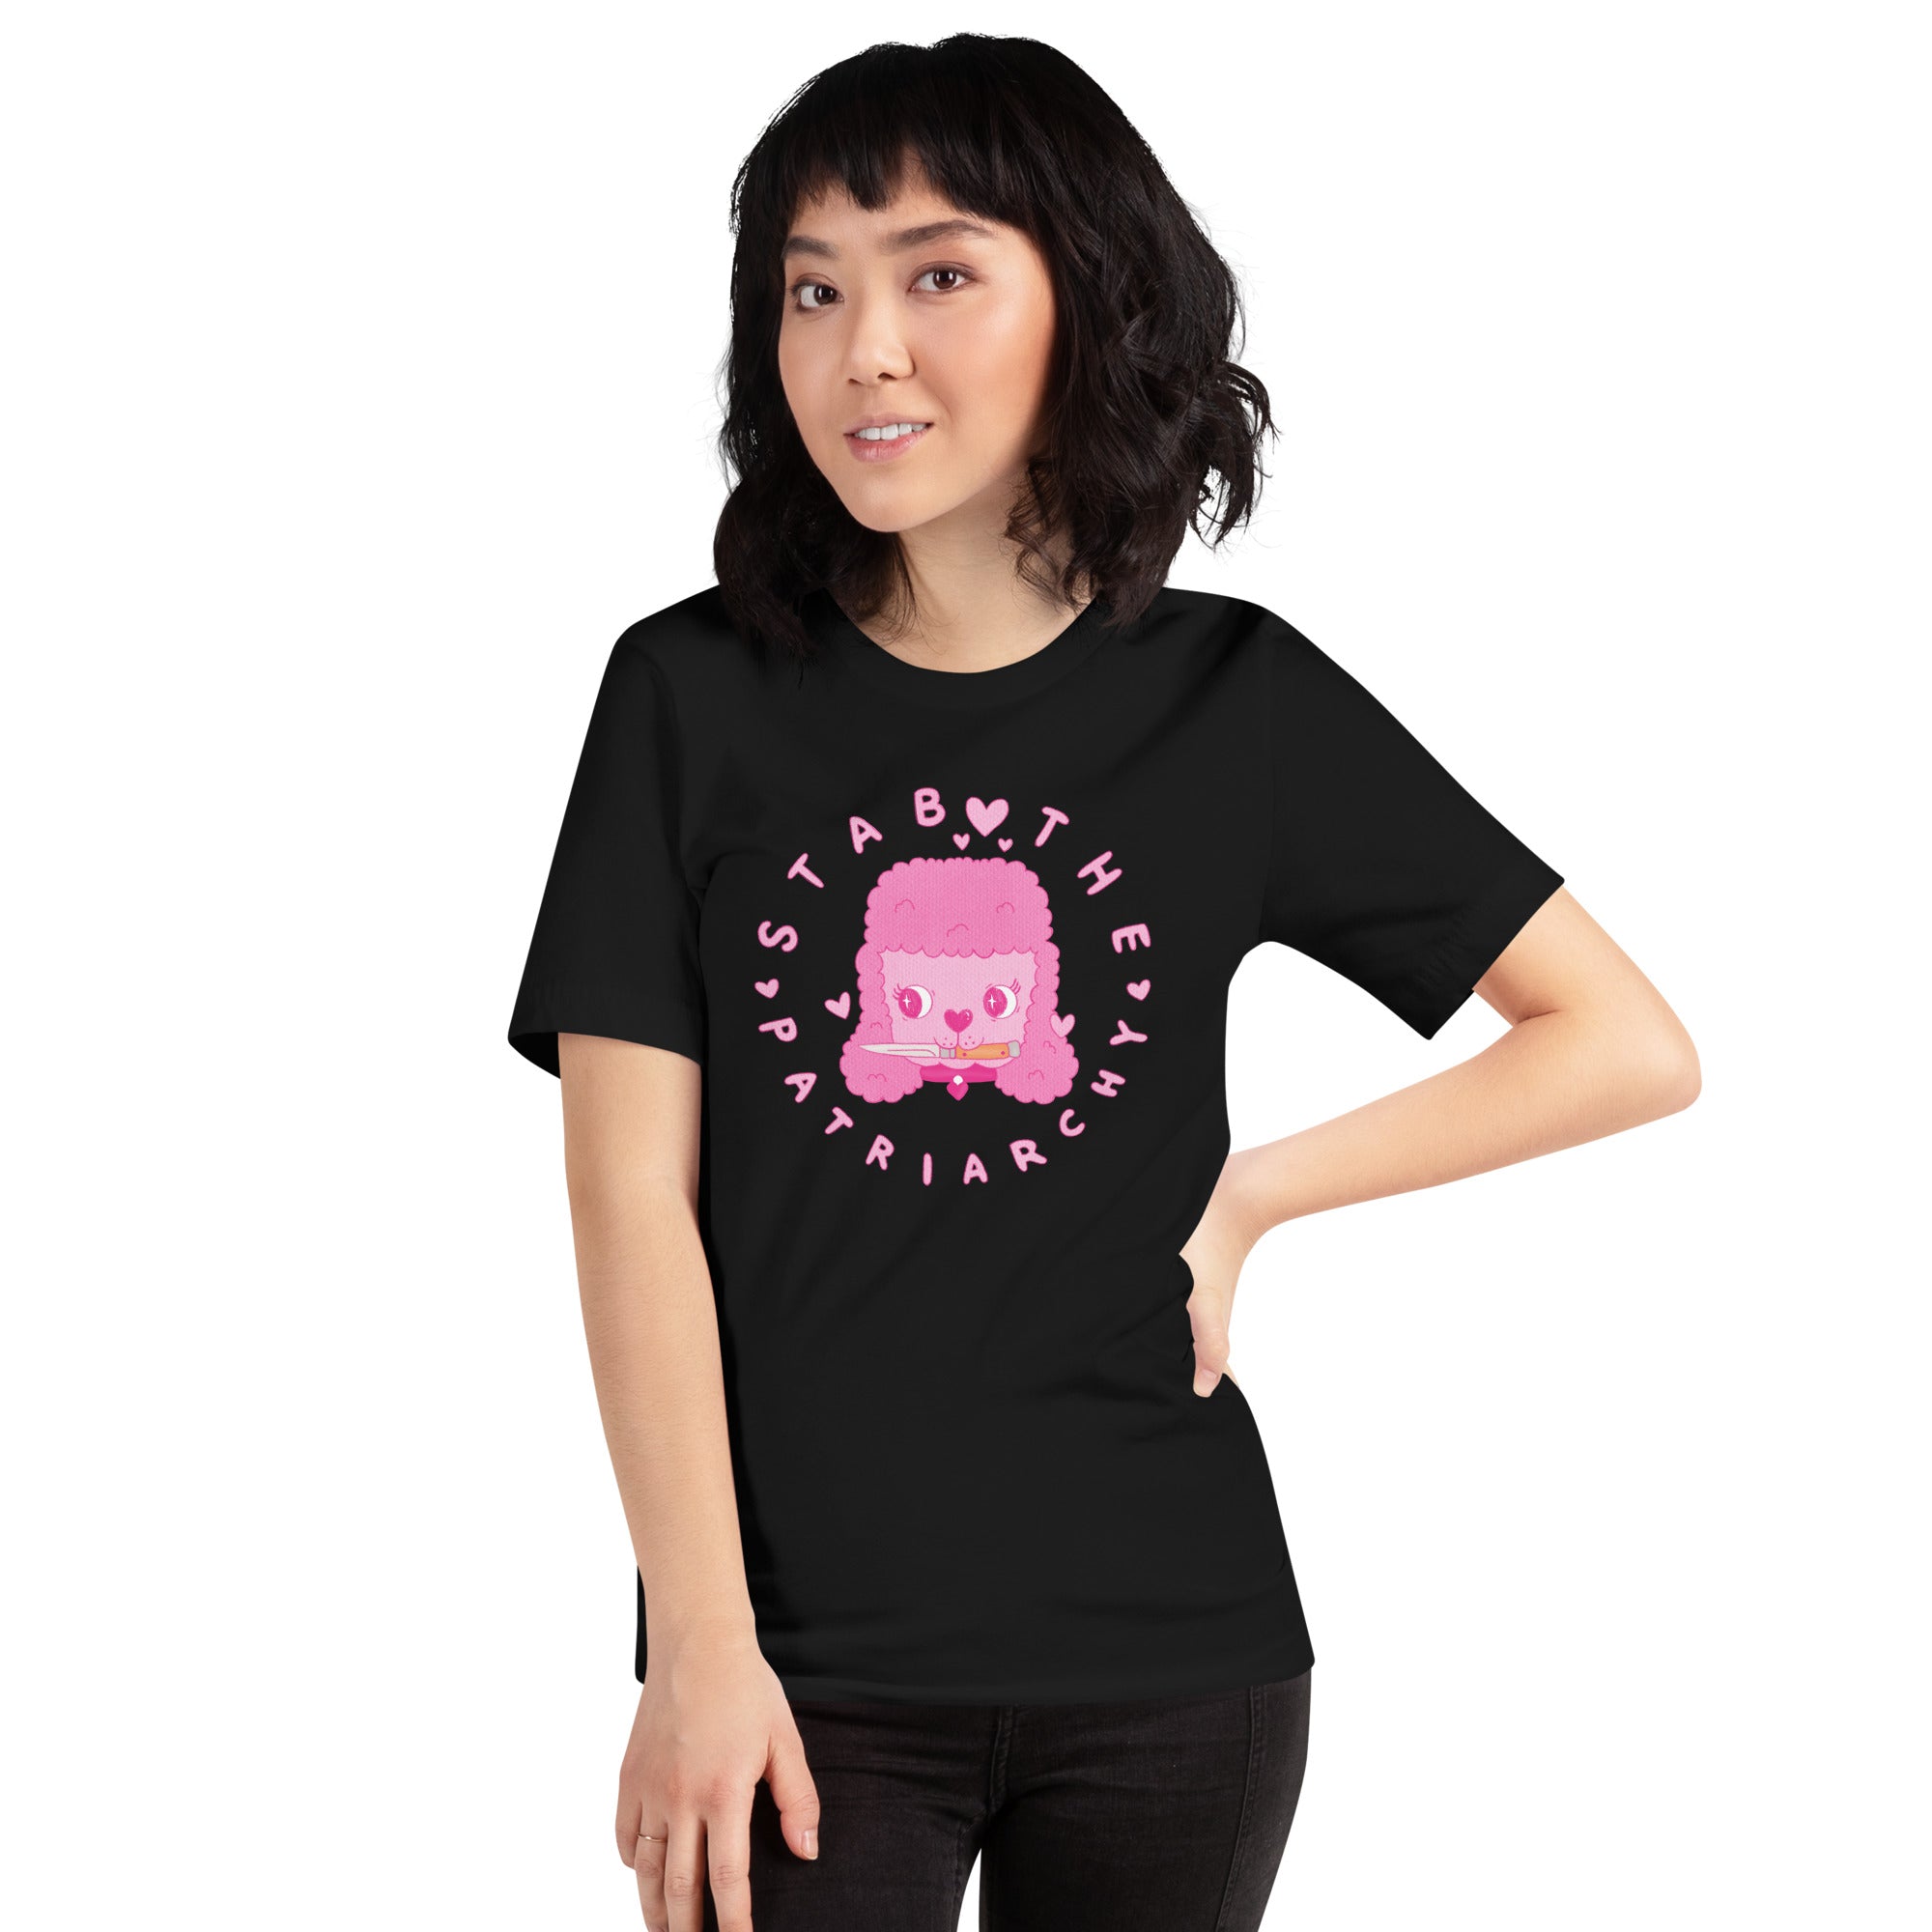 Stab The Patriarchy Unisex t-shirt